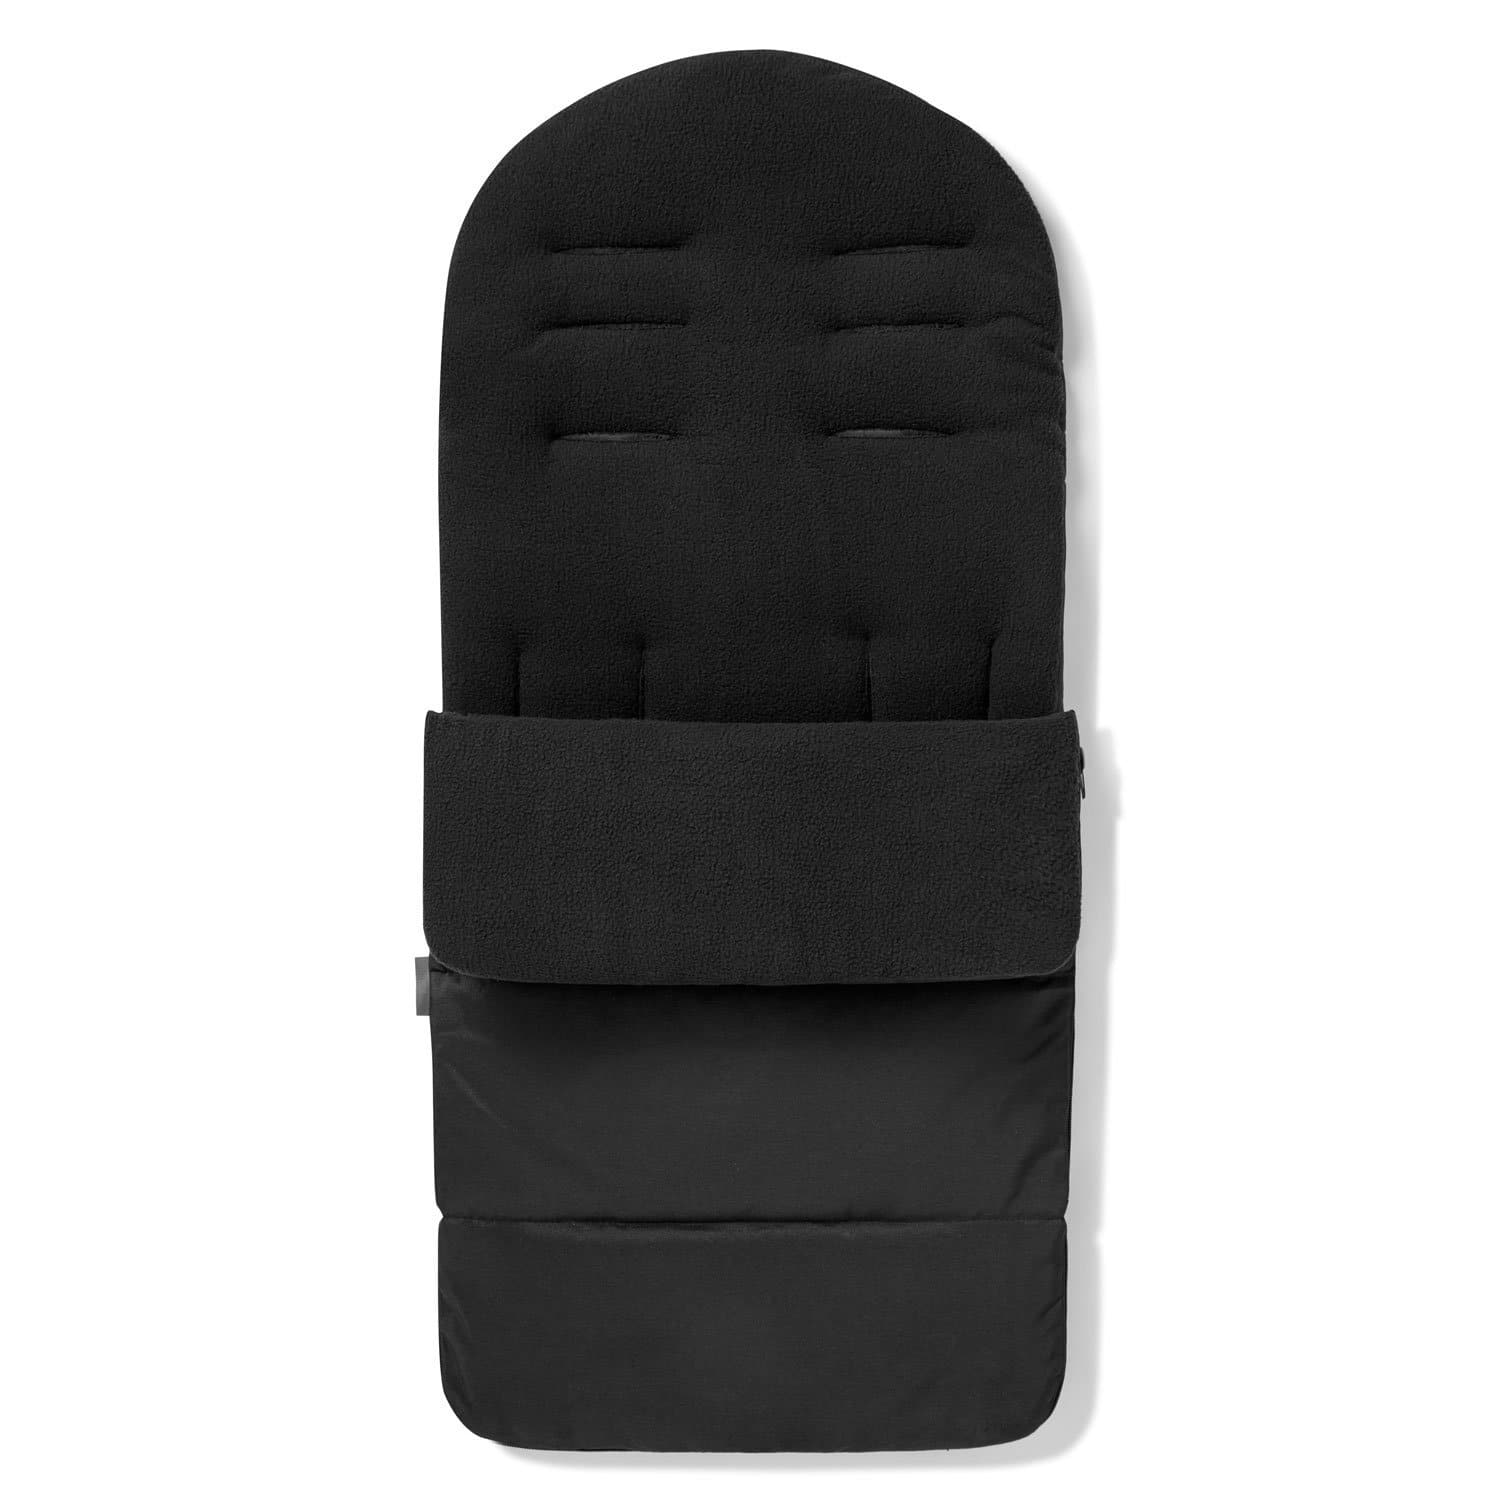 Premium Footmuff / Cosy Toes Compatible with Cosatto - Black Jack / Fits All Models | For Your Little One